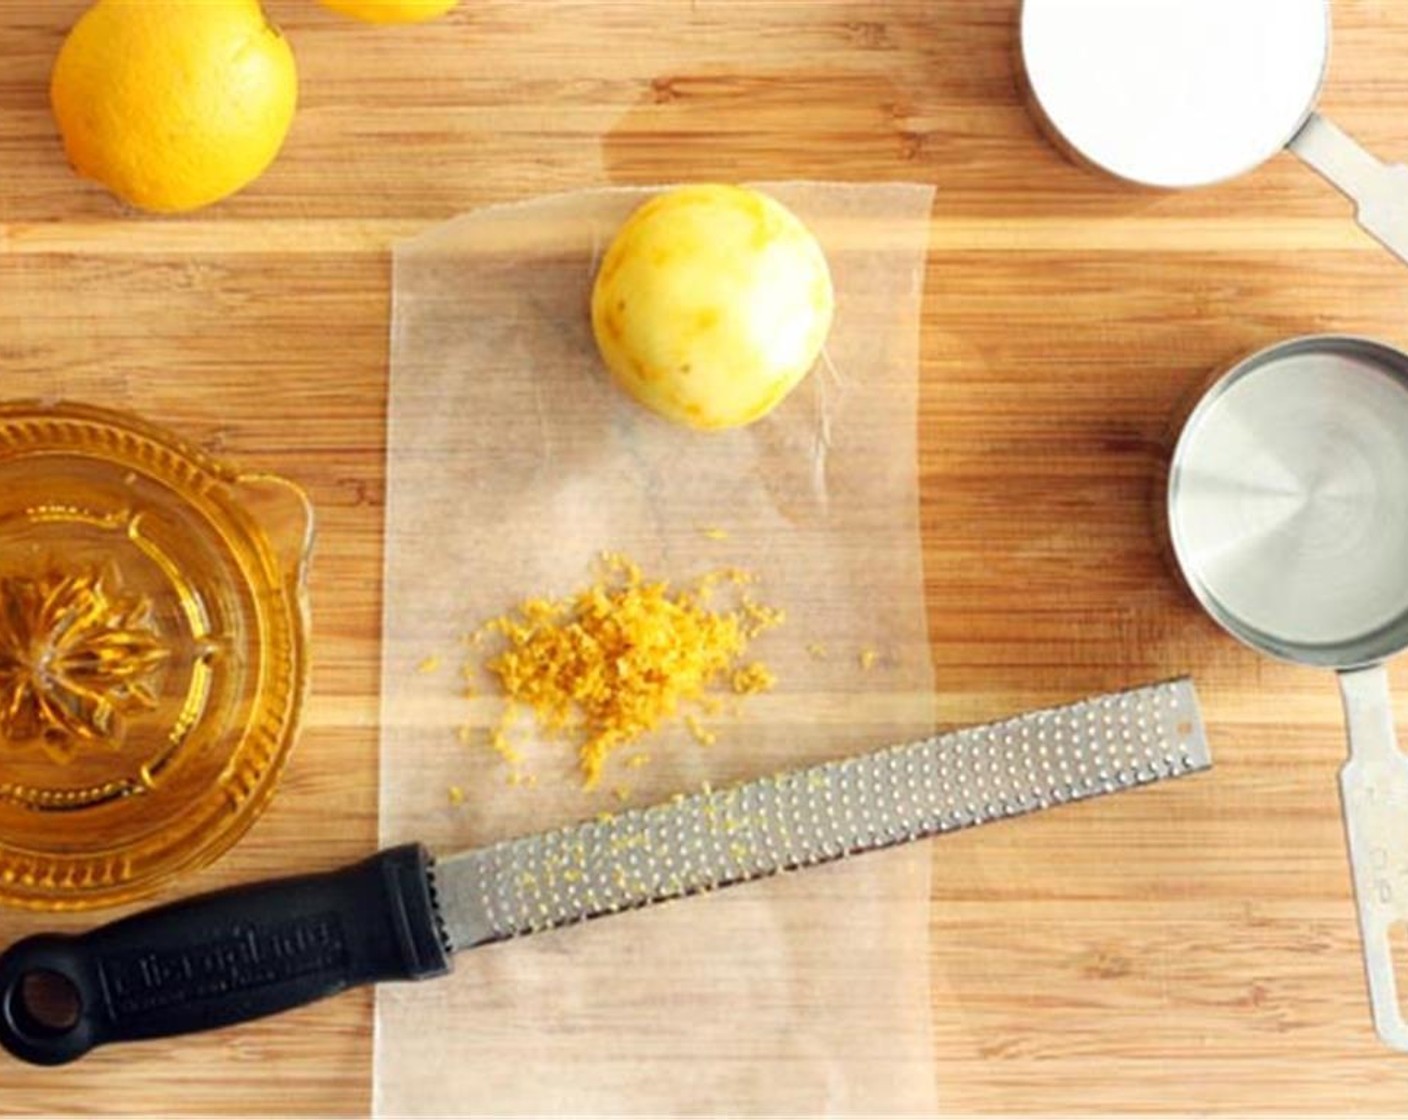 step 1 Scrub all Lemons (5) clean, then pat dry with a dry towel or tissues. Use a hand grater or lemon grater to zest the lemons.